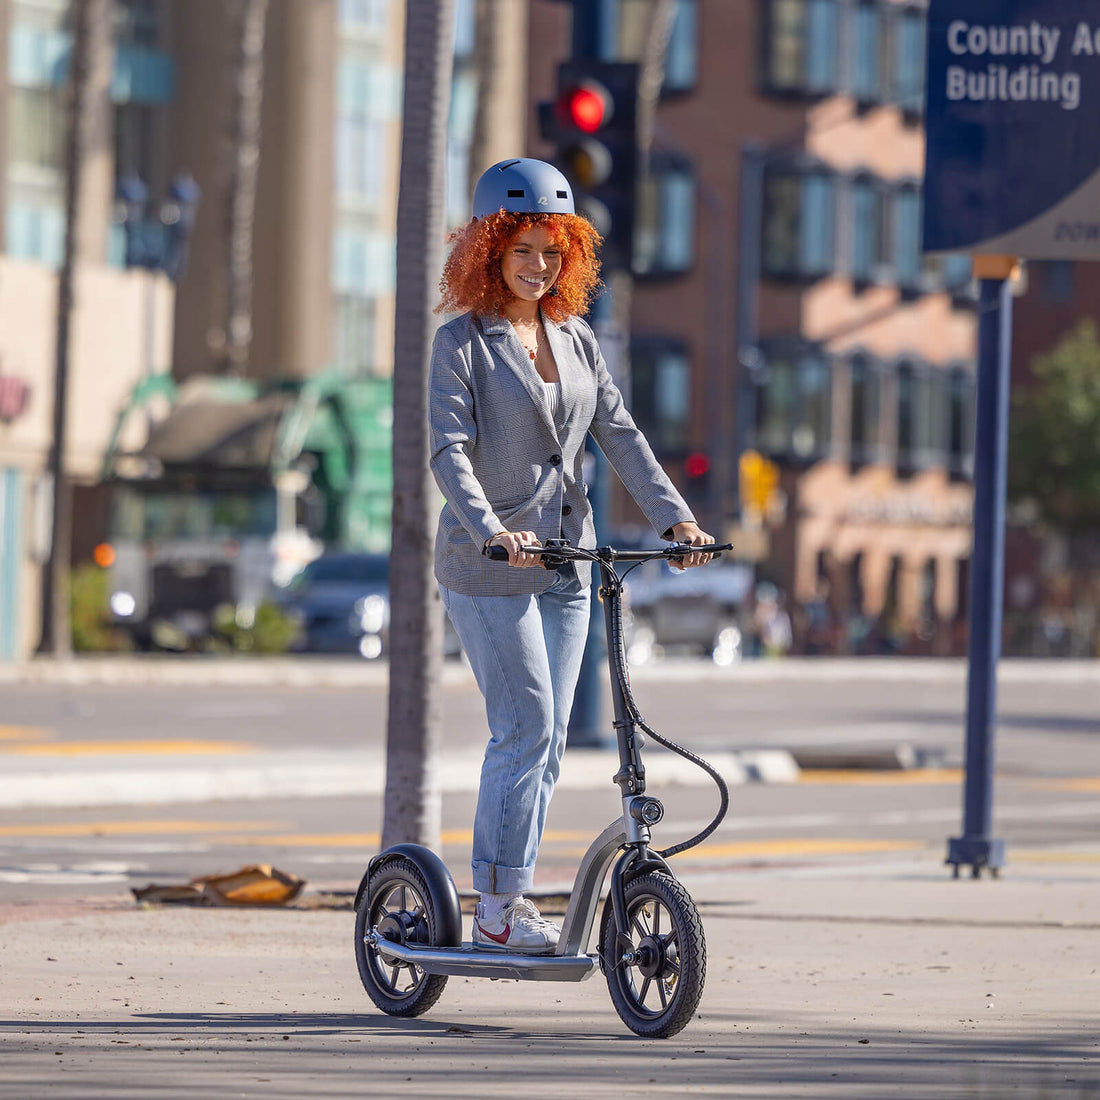 Hiboy VE1 Pro Electric Scooter